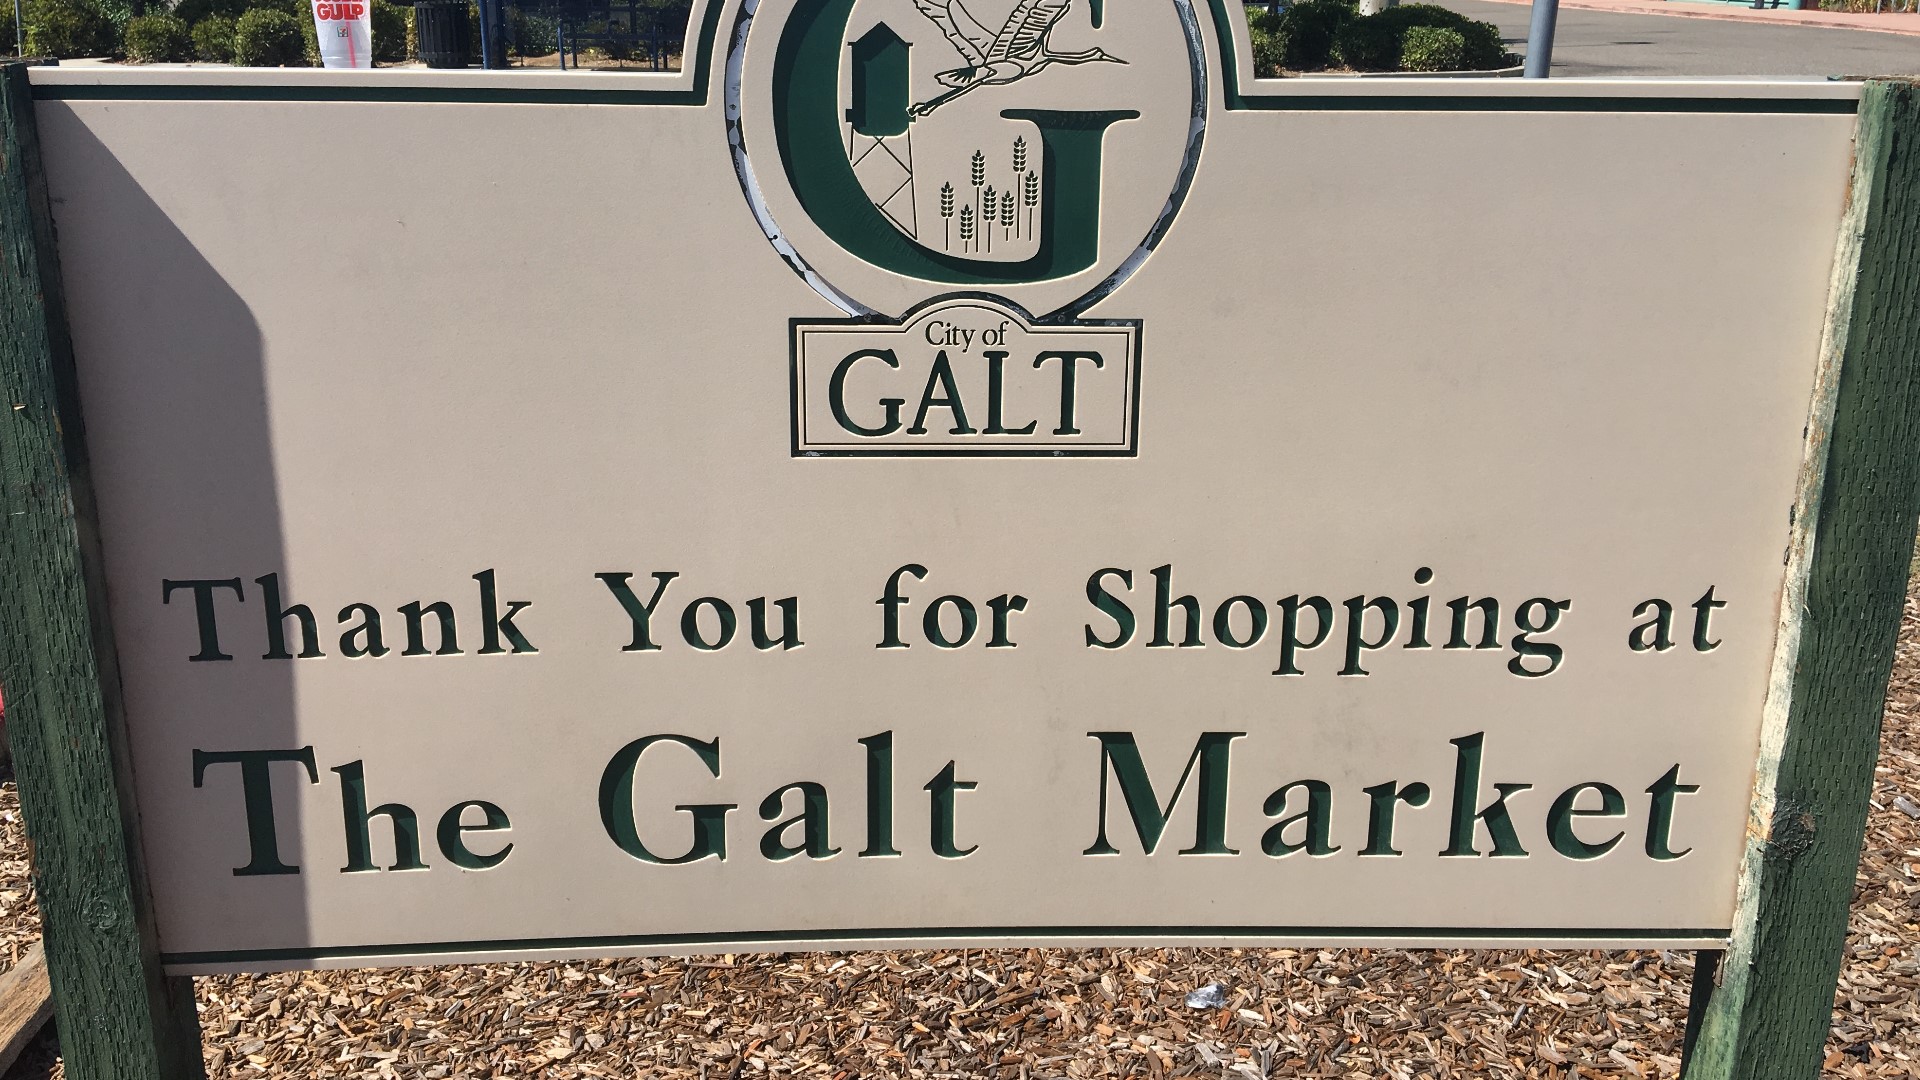 The 95632 zip code encompasses some great sites in Galt, such as the Galt Market, Cosumnes River Preserve, and Spaans Cookie Company.